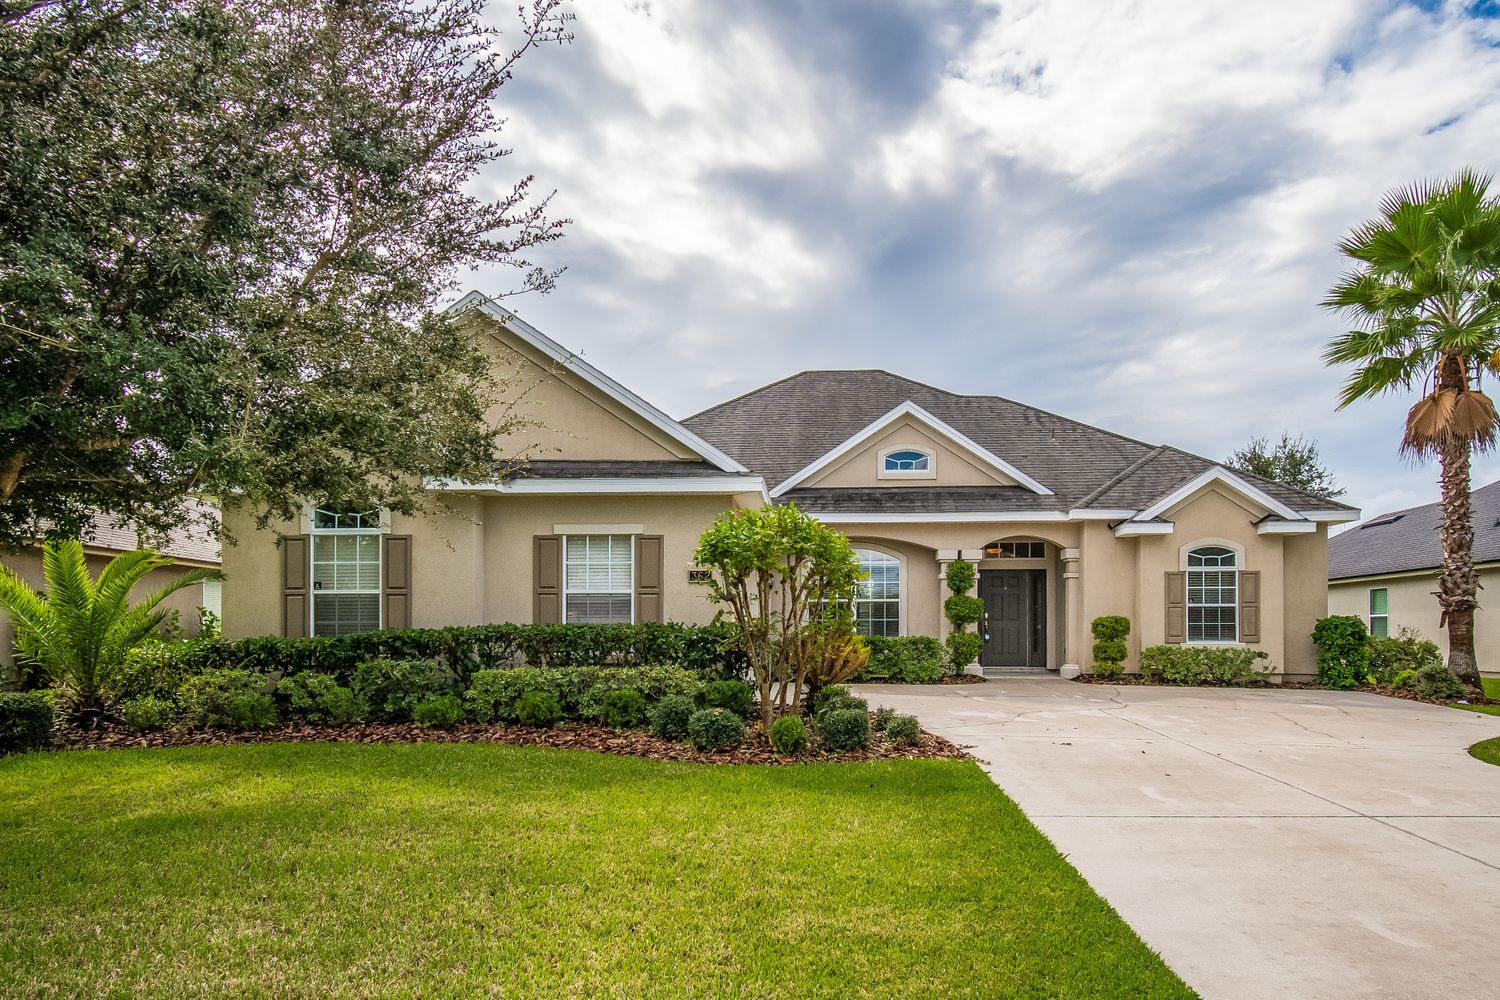 Stunning home with extra large driveway at Invitation Homes Jacksonville.